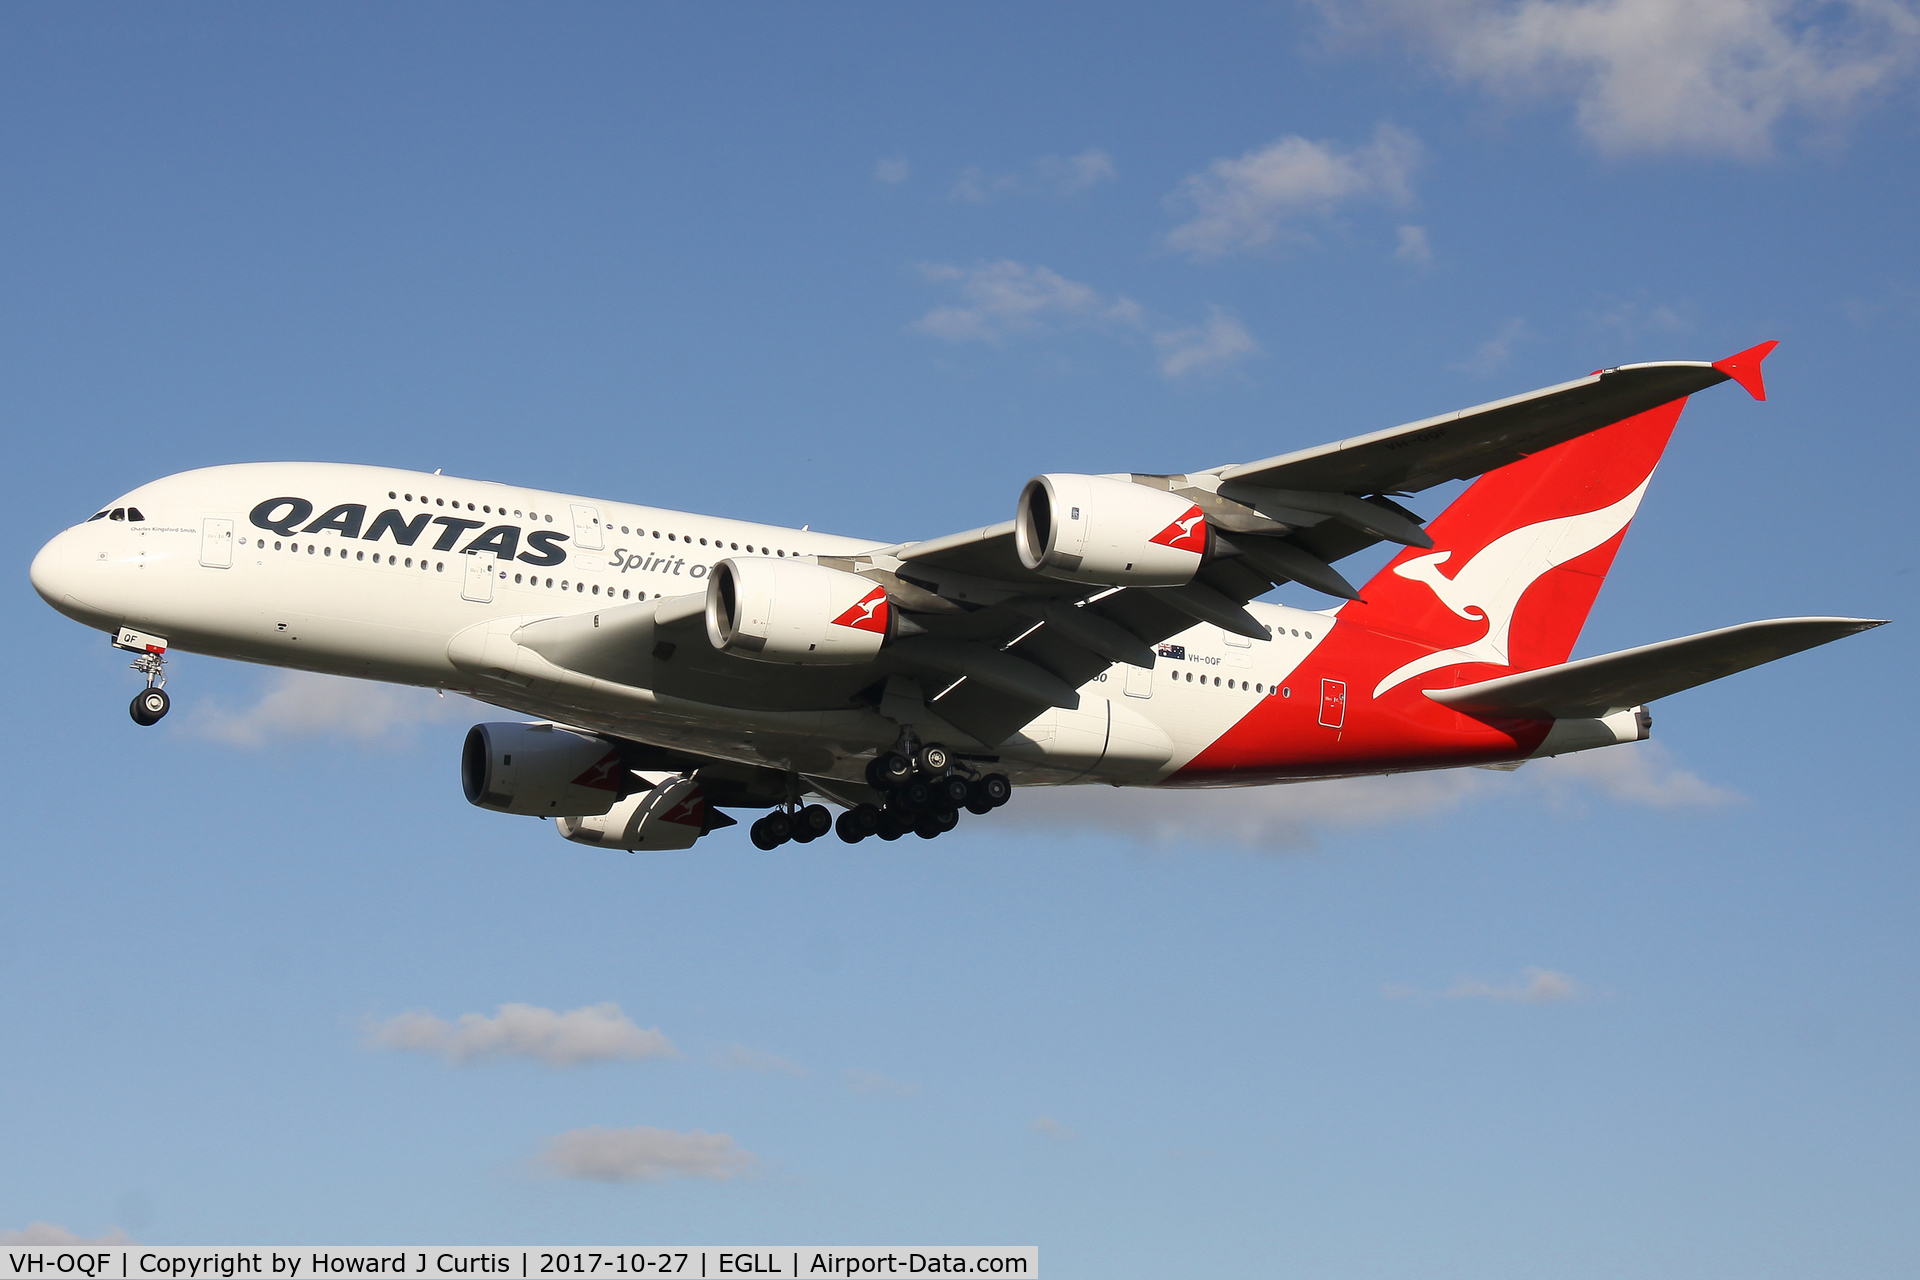 VH-OQF, 2009 Airbus A380-842 C/N 029, On approach